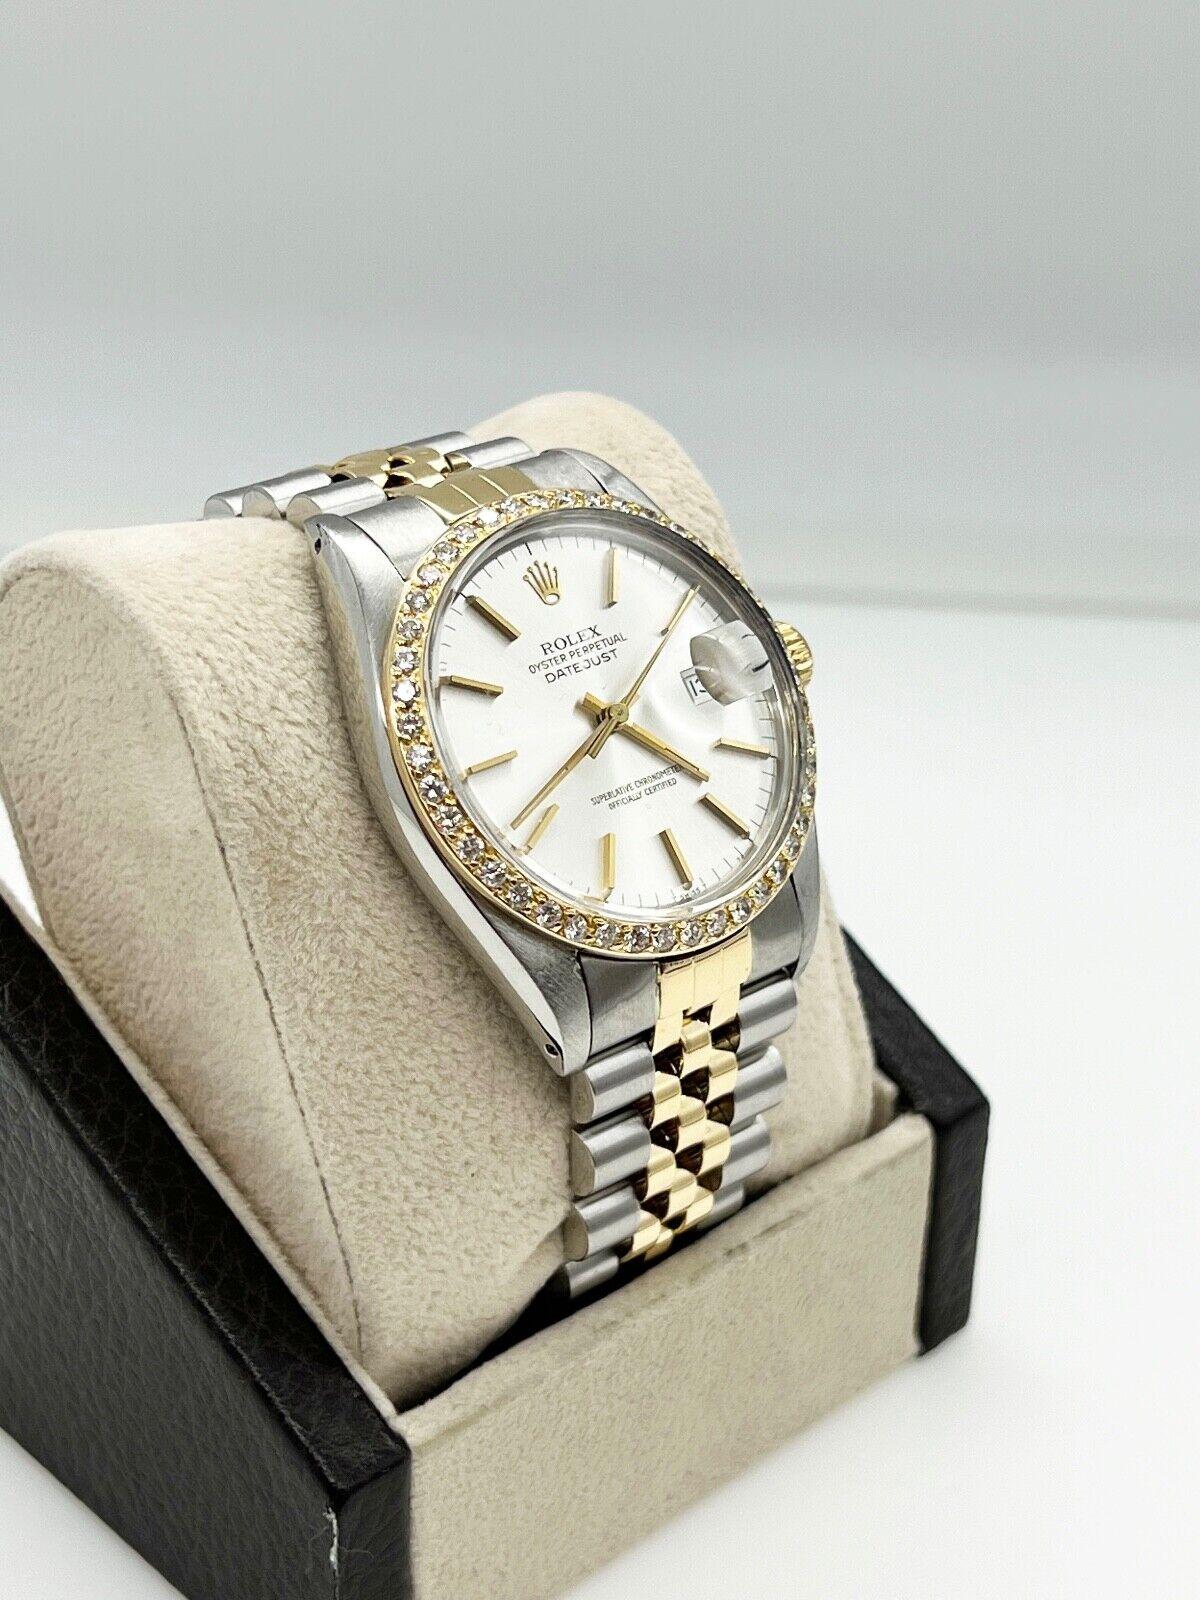 Rolex Datejust 16013 Silver Dial 18K Yellow Gold Stainless Steel In Excellent Condition For Sale In San Diego, CA